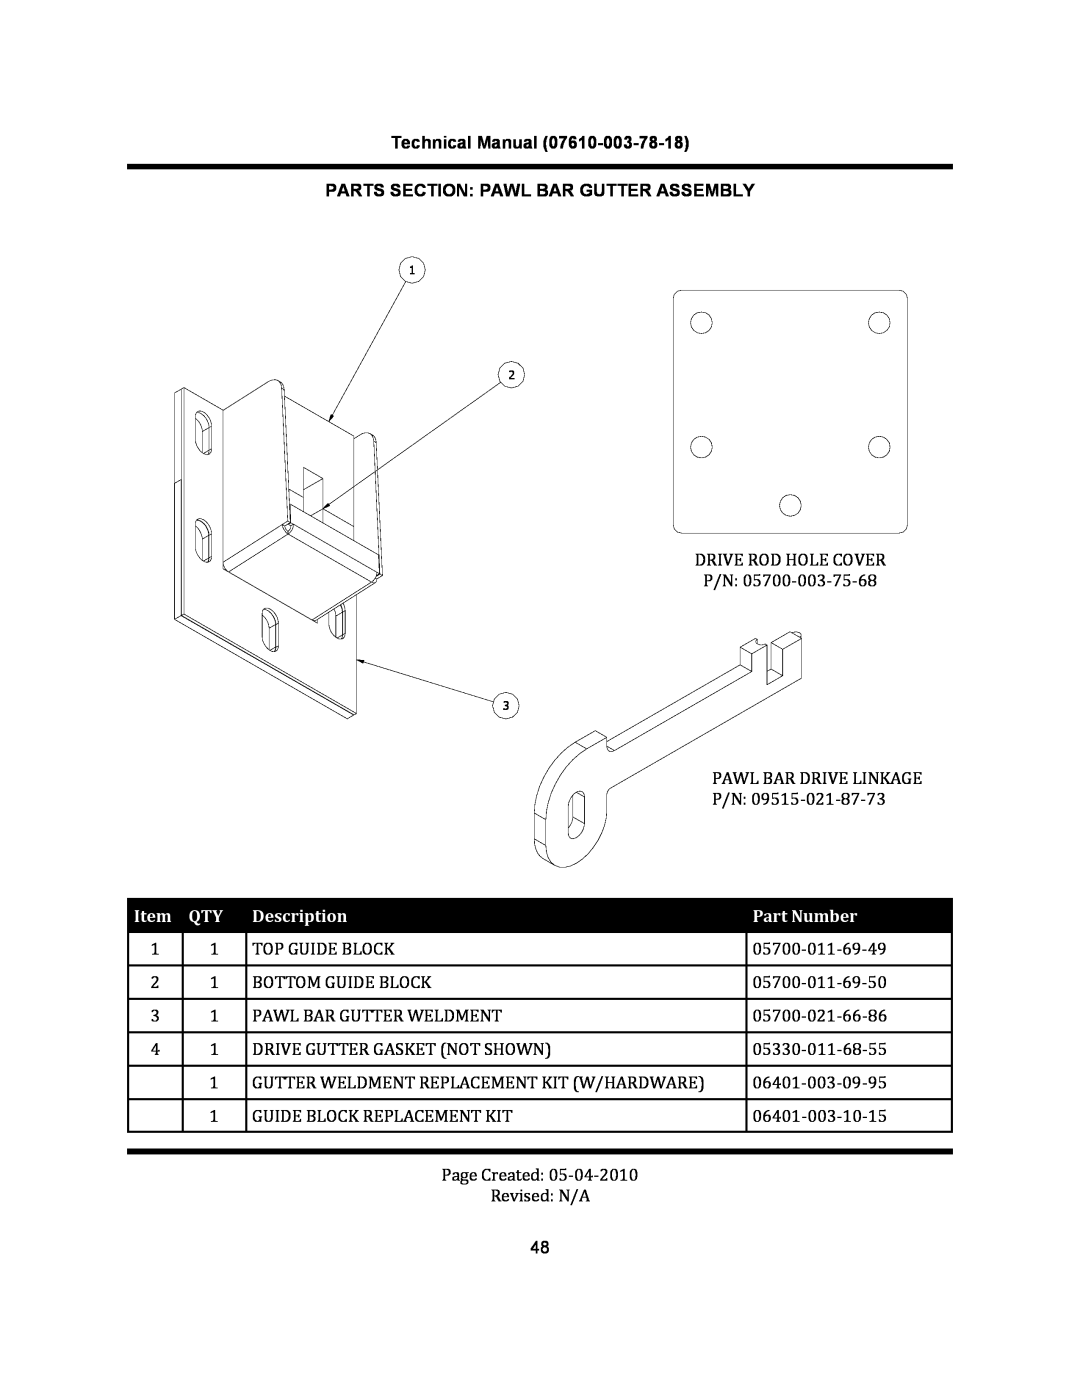 Jackson CREW 66S, CREW 44S manual Technical Manual PARTS SECTION PAWL BAR GUTTER ASSEMBLY, Description, Part Number 